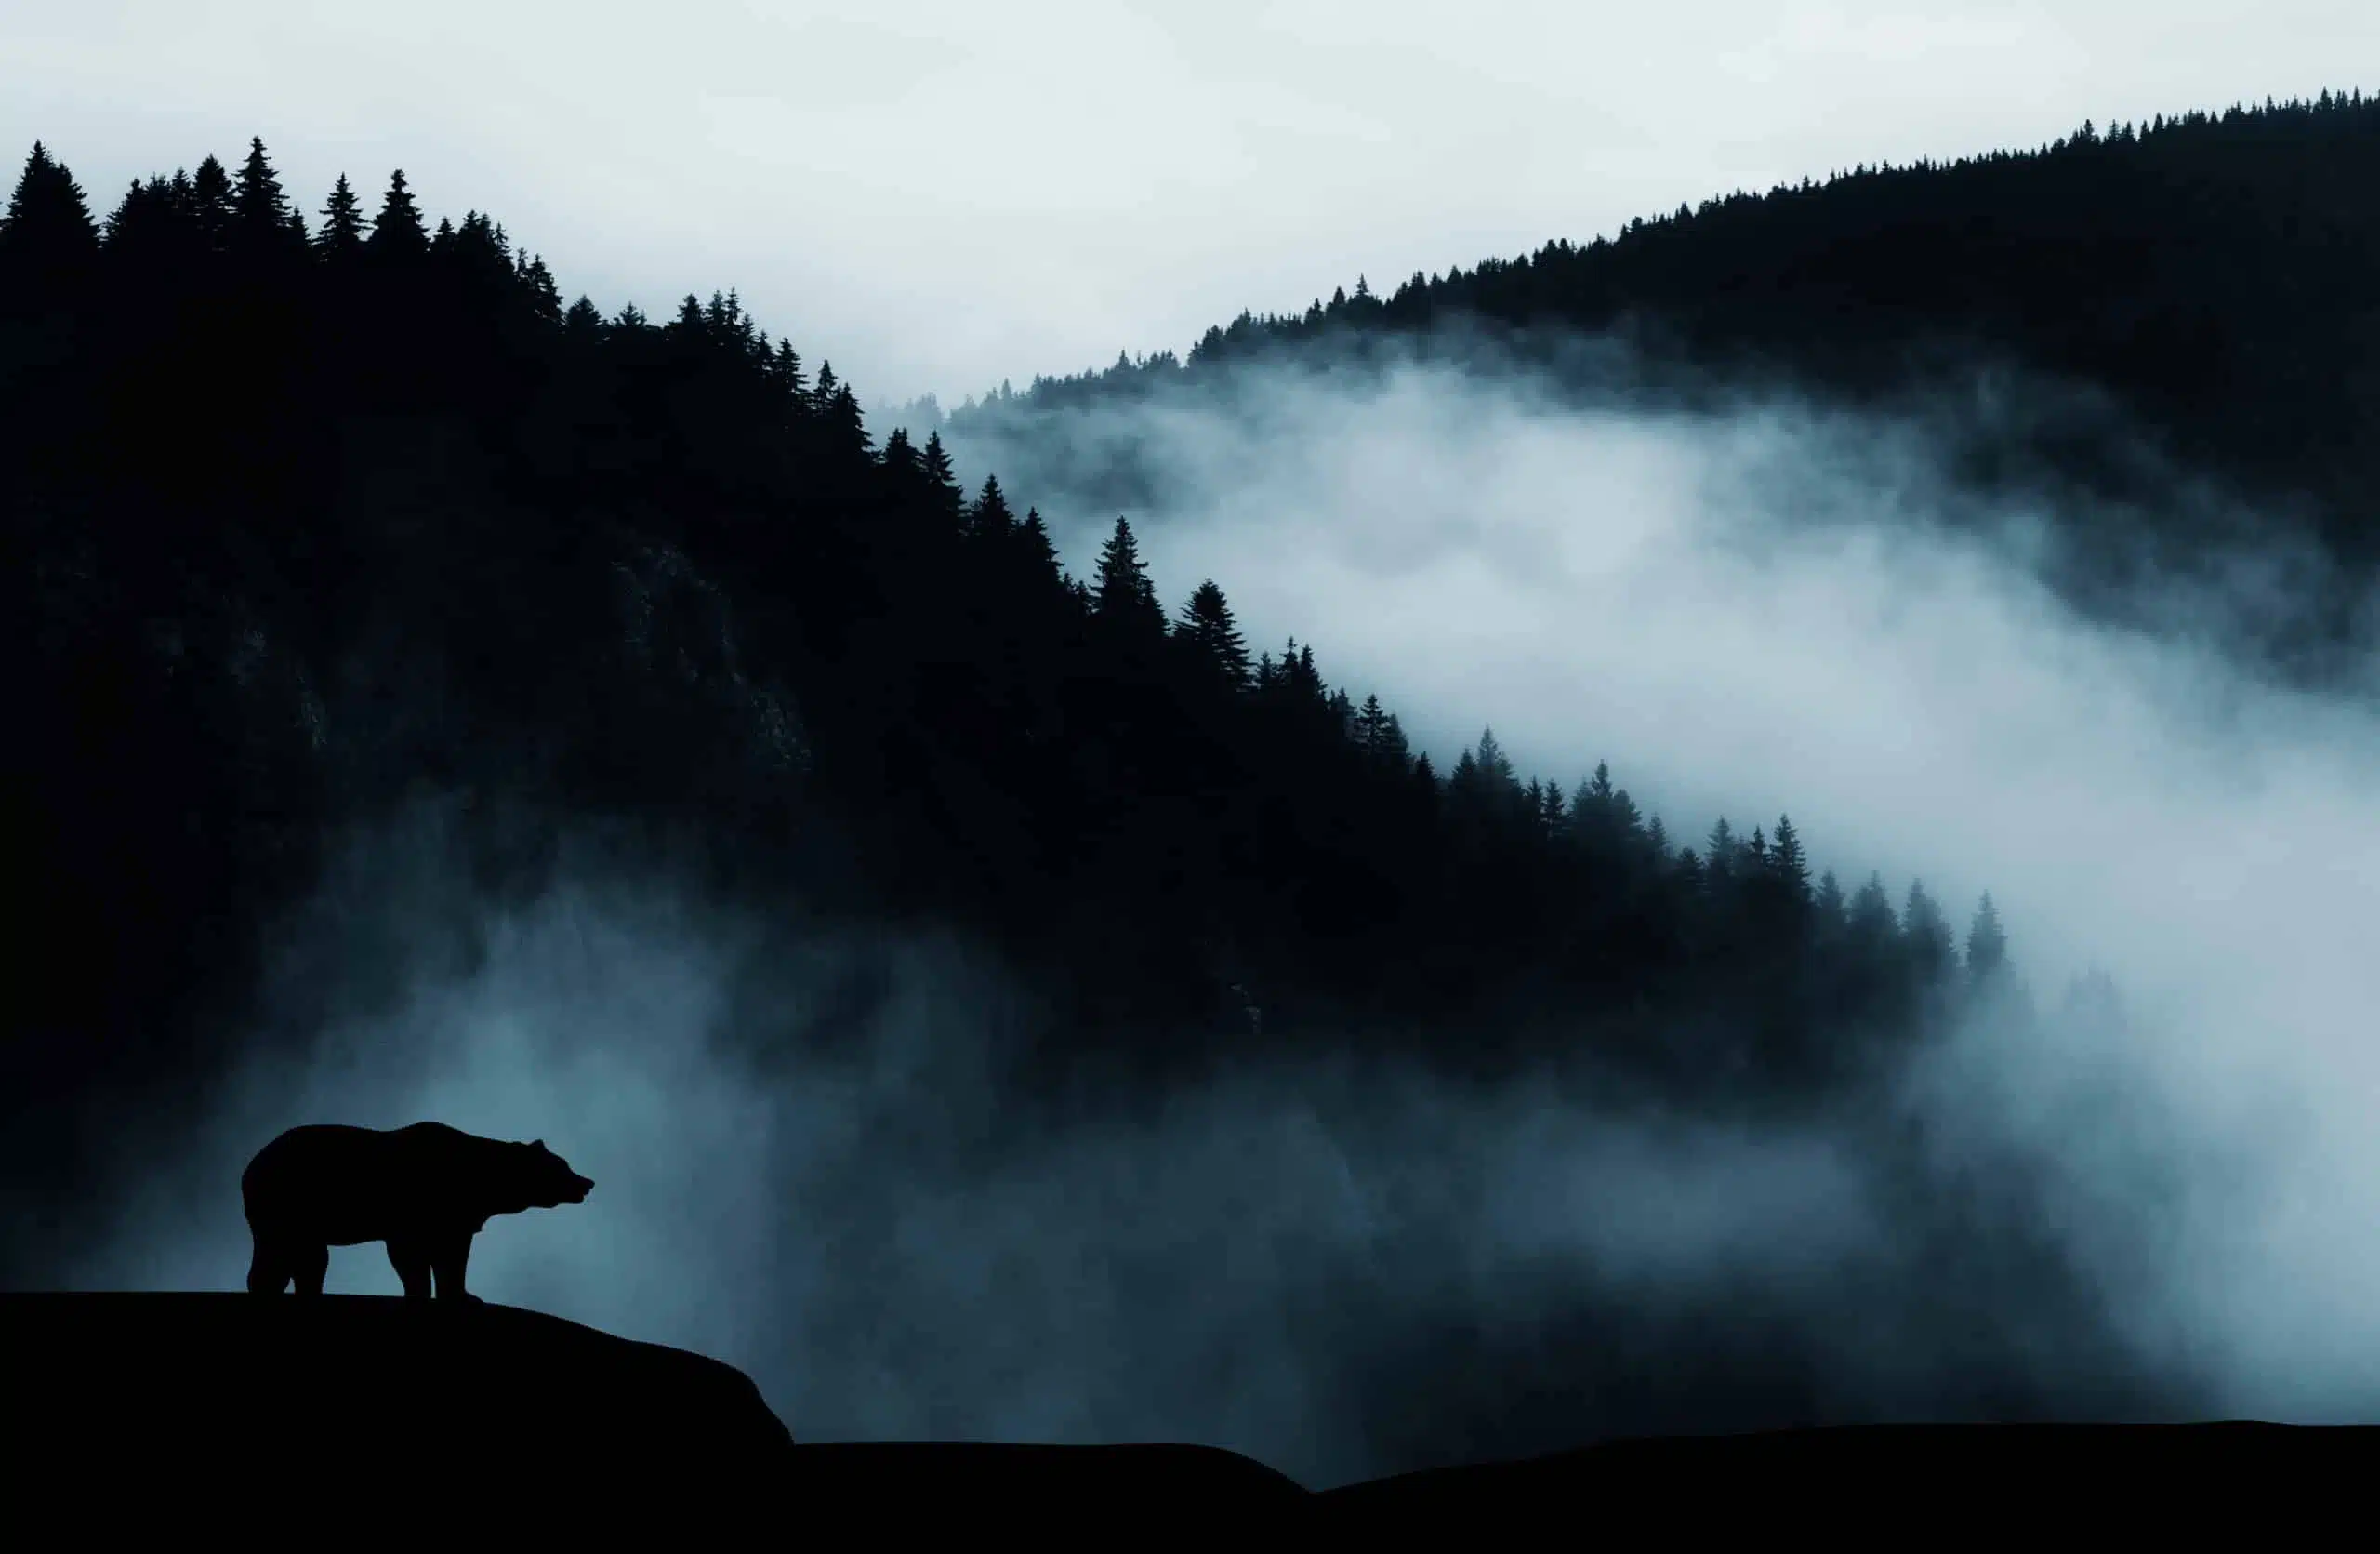 wilderness landscape with bear silhouette and dark misty mountain.